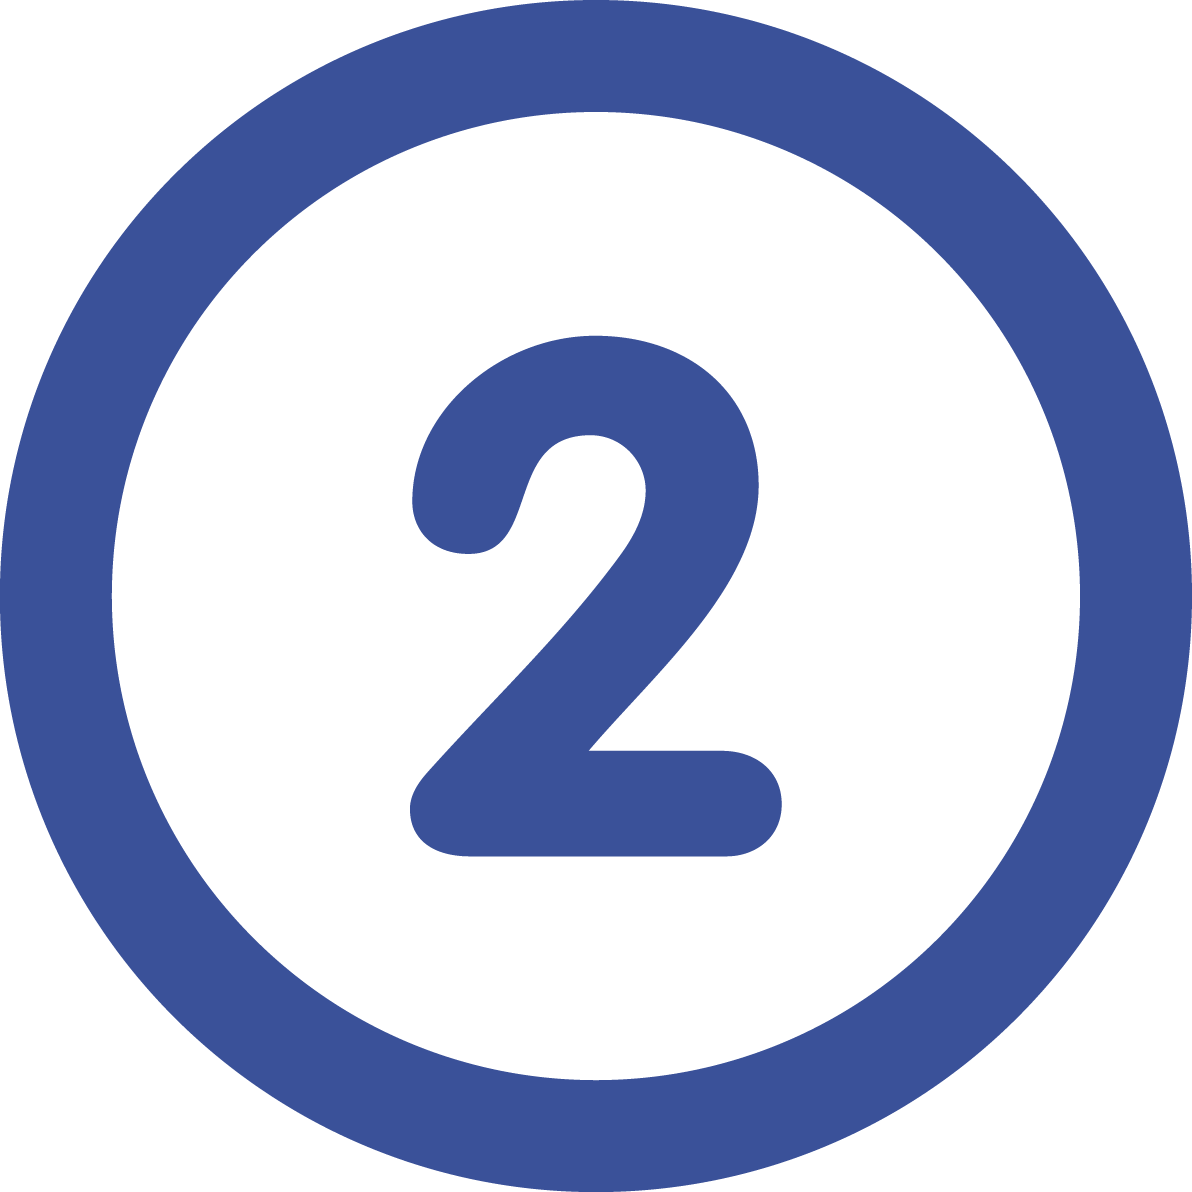 Blue Number 2 designed by Freepik from Flaticon